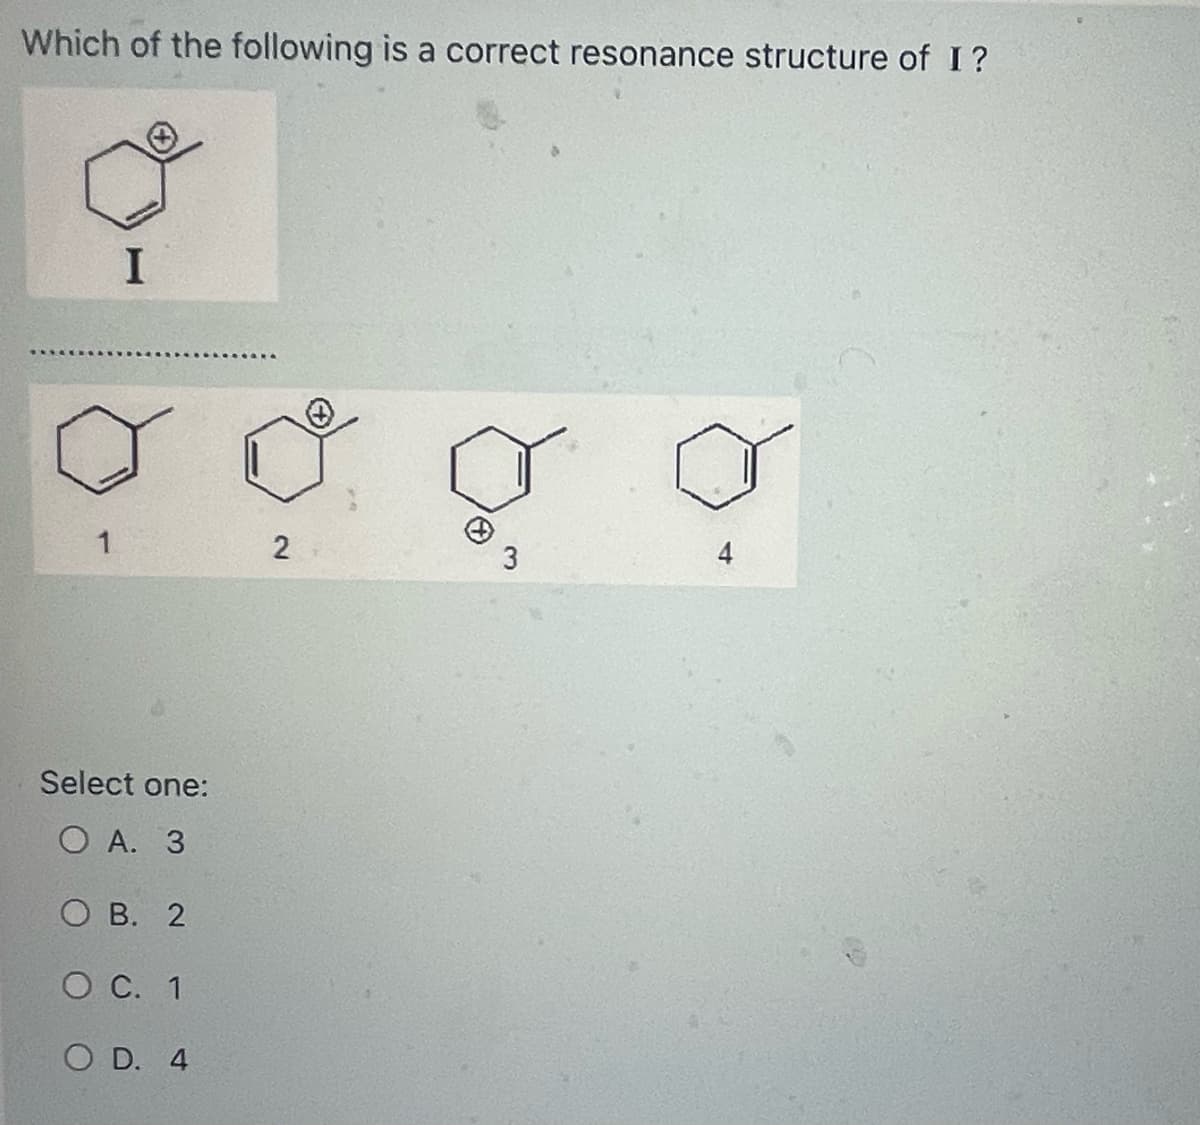 Which of the following is a correct resonance structure of I?
I
Select one:
OA. 3
OB. 2
O C. 1
OD. 4
2
4